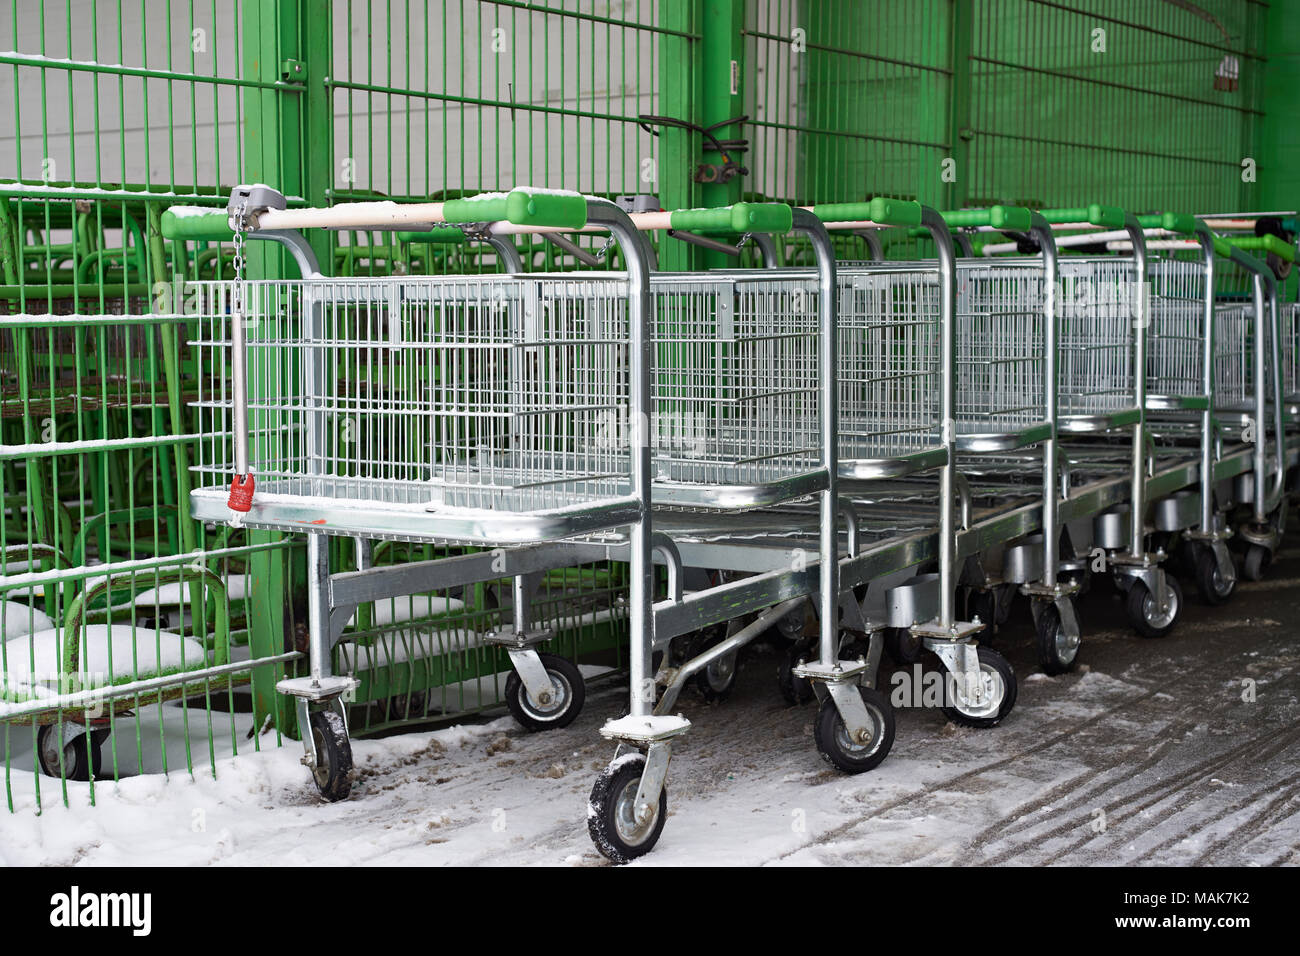 Carts for goods in supermarket Stock Photo